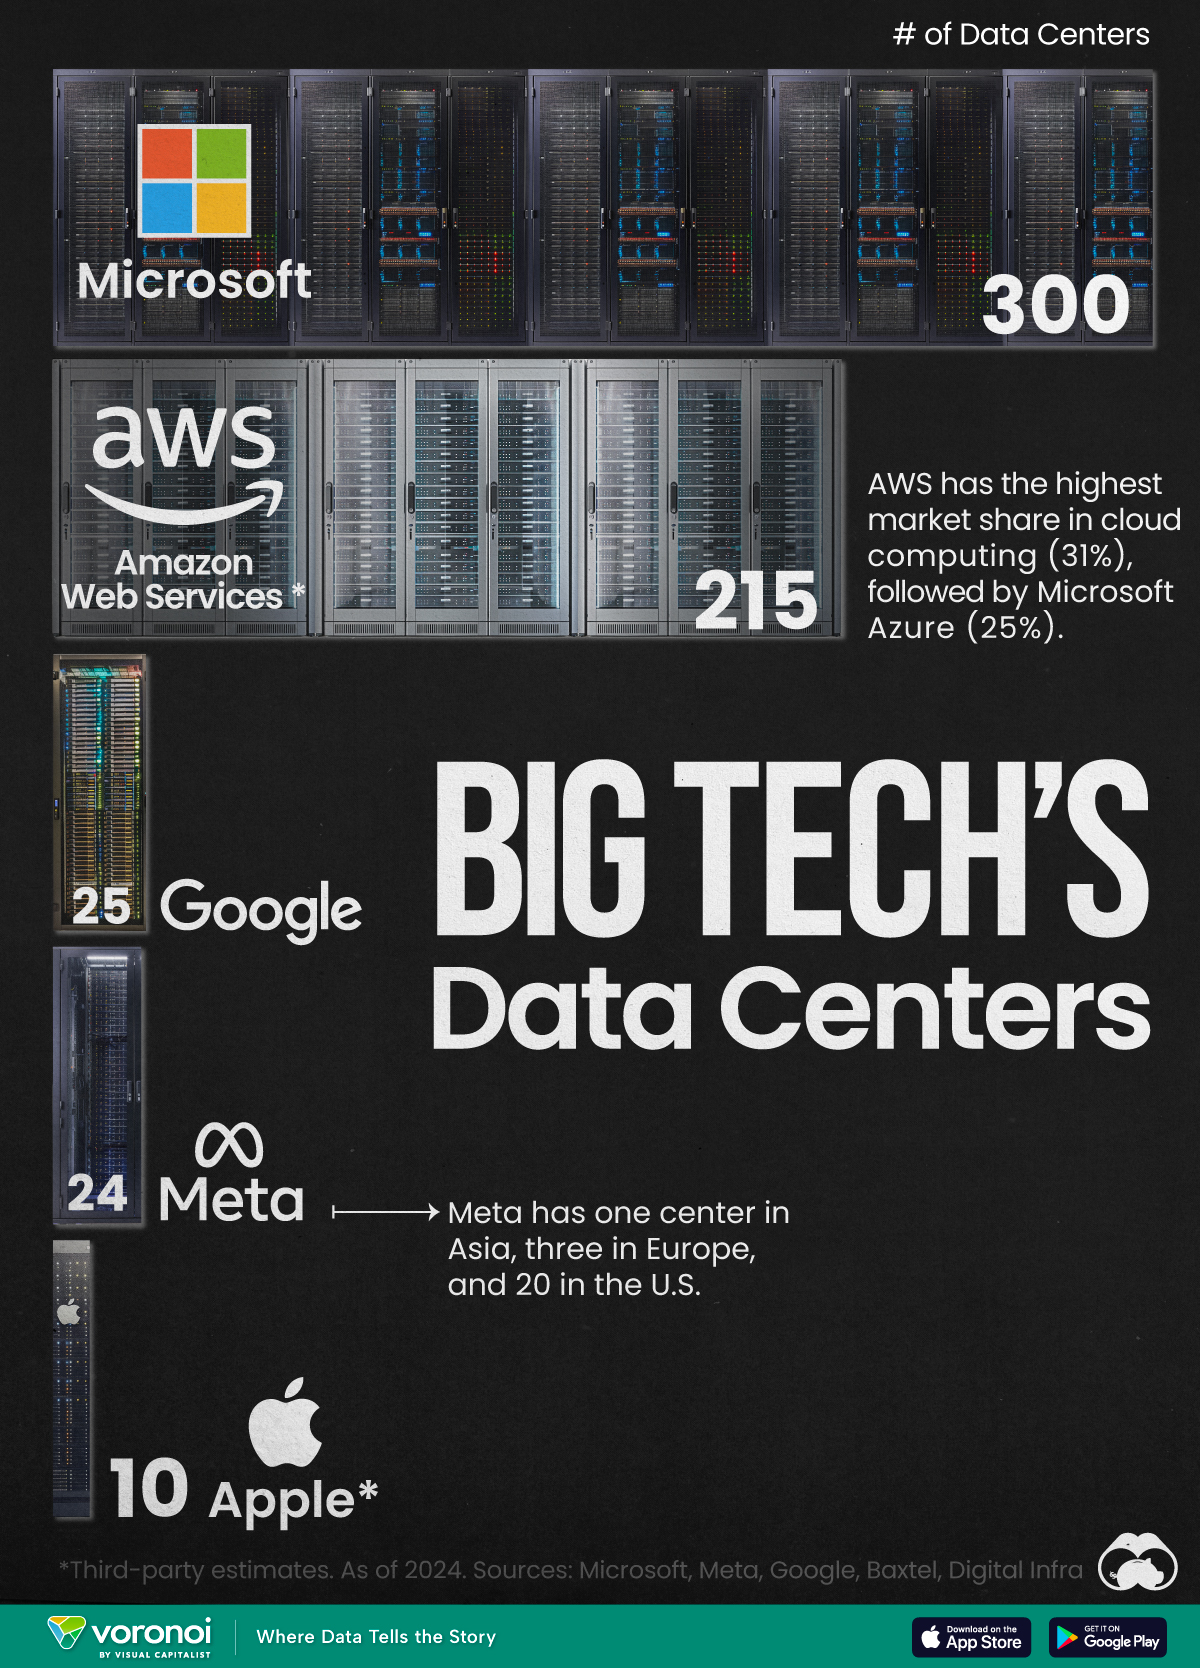 A bar chart showing major tech companies and the number of their data centers.